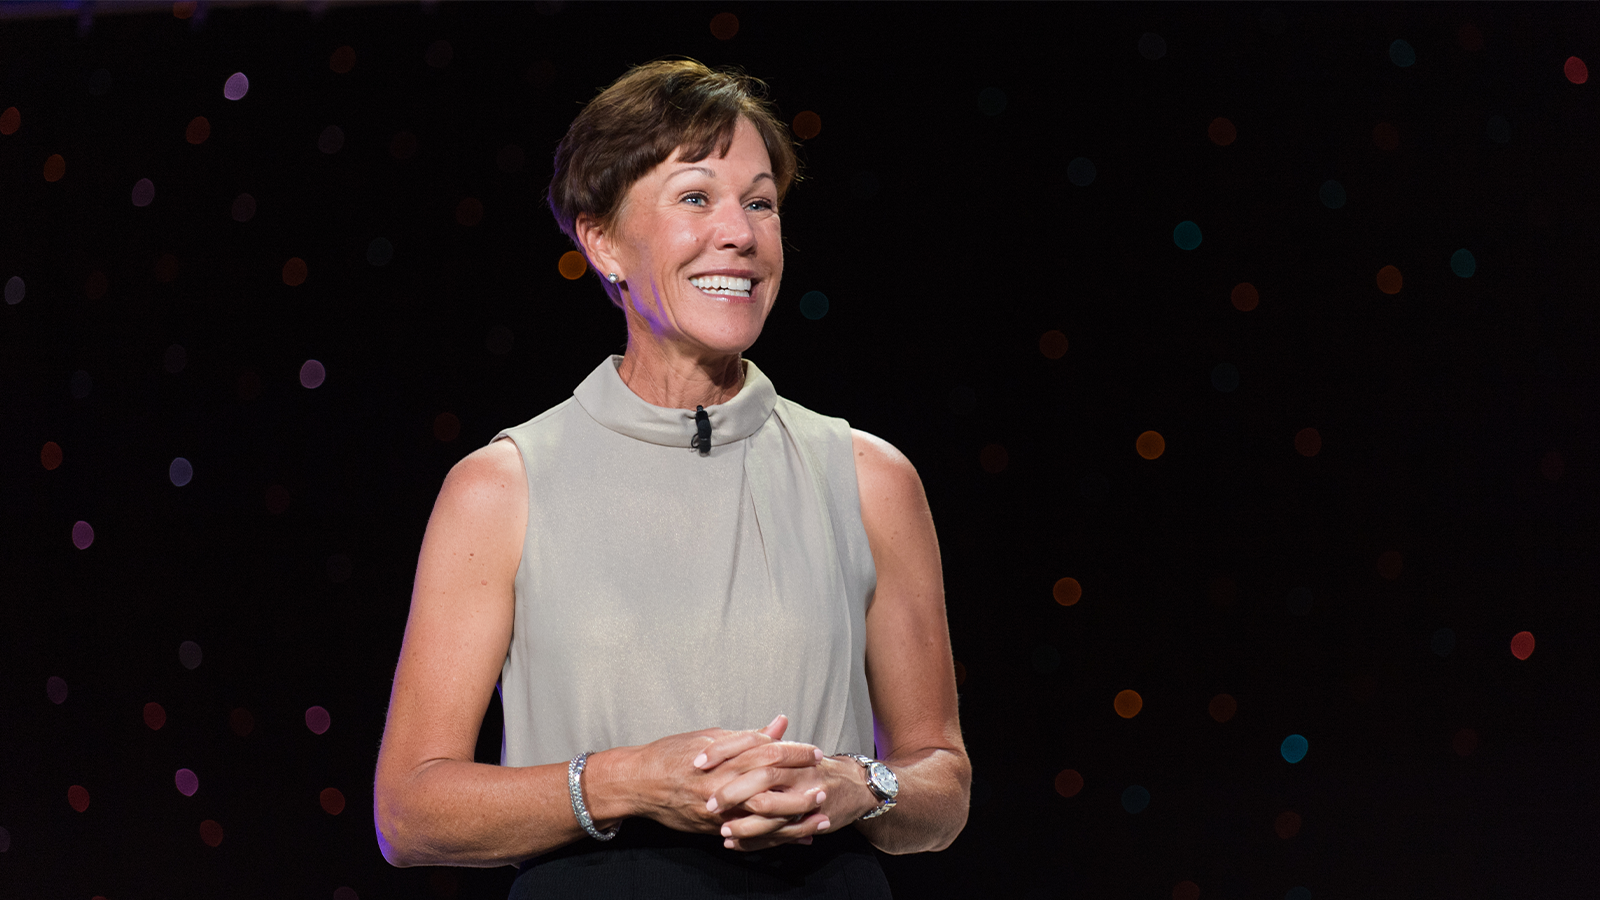 PGA of America President, Suzy Whaley speaks during the PGA of America National Awards Ceremony for the 103rd PGA Annual Meeting at the Palm Beach County Convention Center on November 7, 2019 in West Palm Beach, FL. (Photo by Montana Pritchard/The PGA of America)